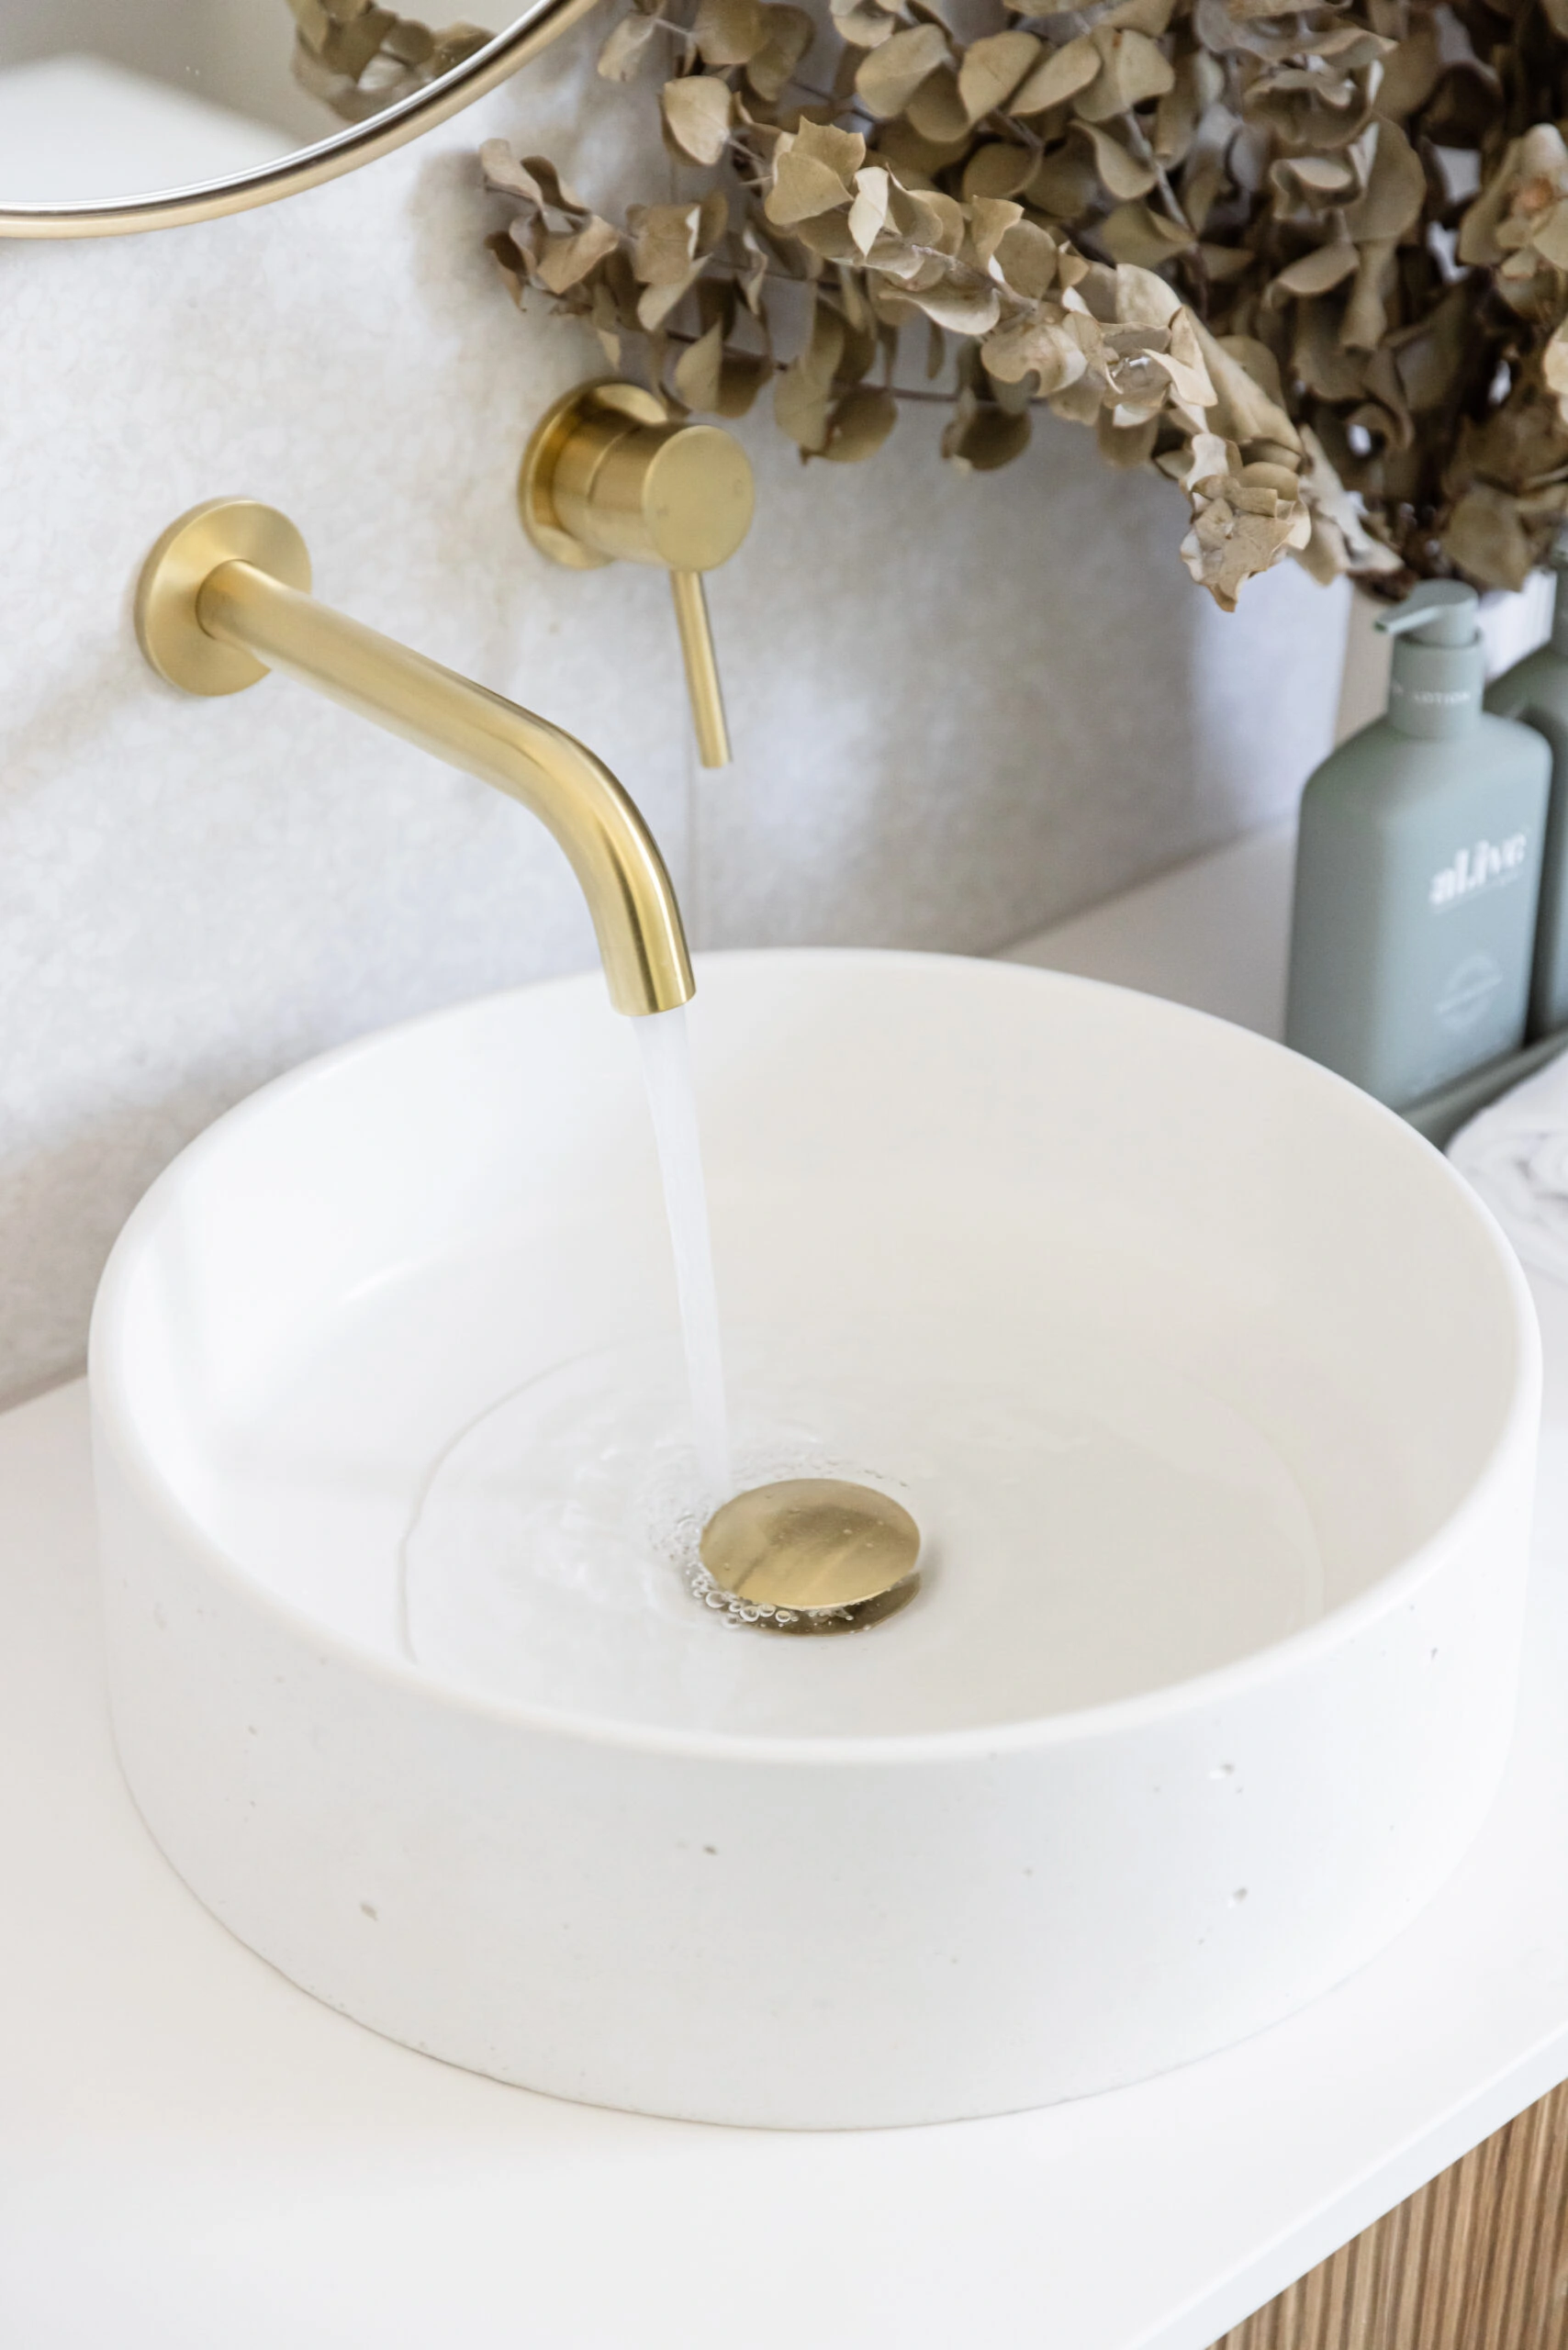 White sink and gold taps in bathroom renovation